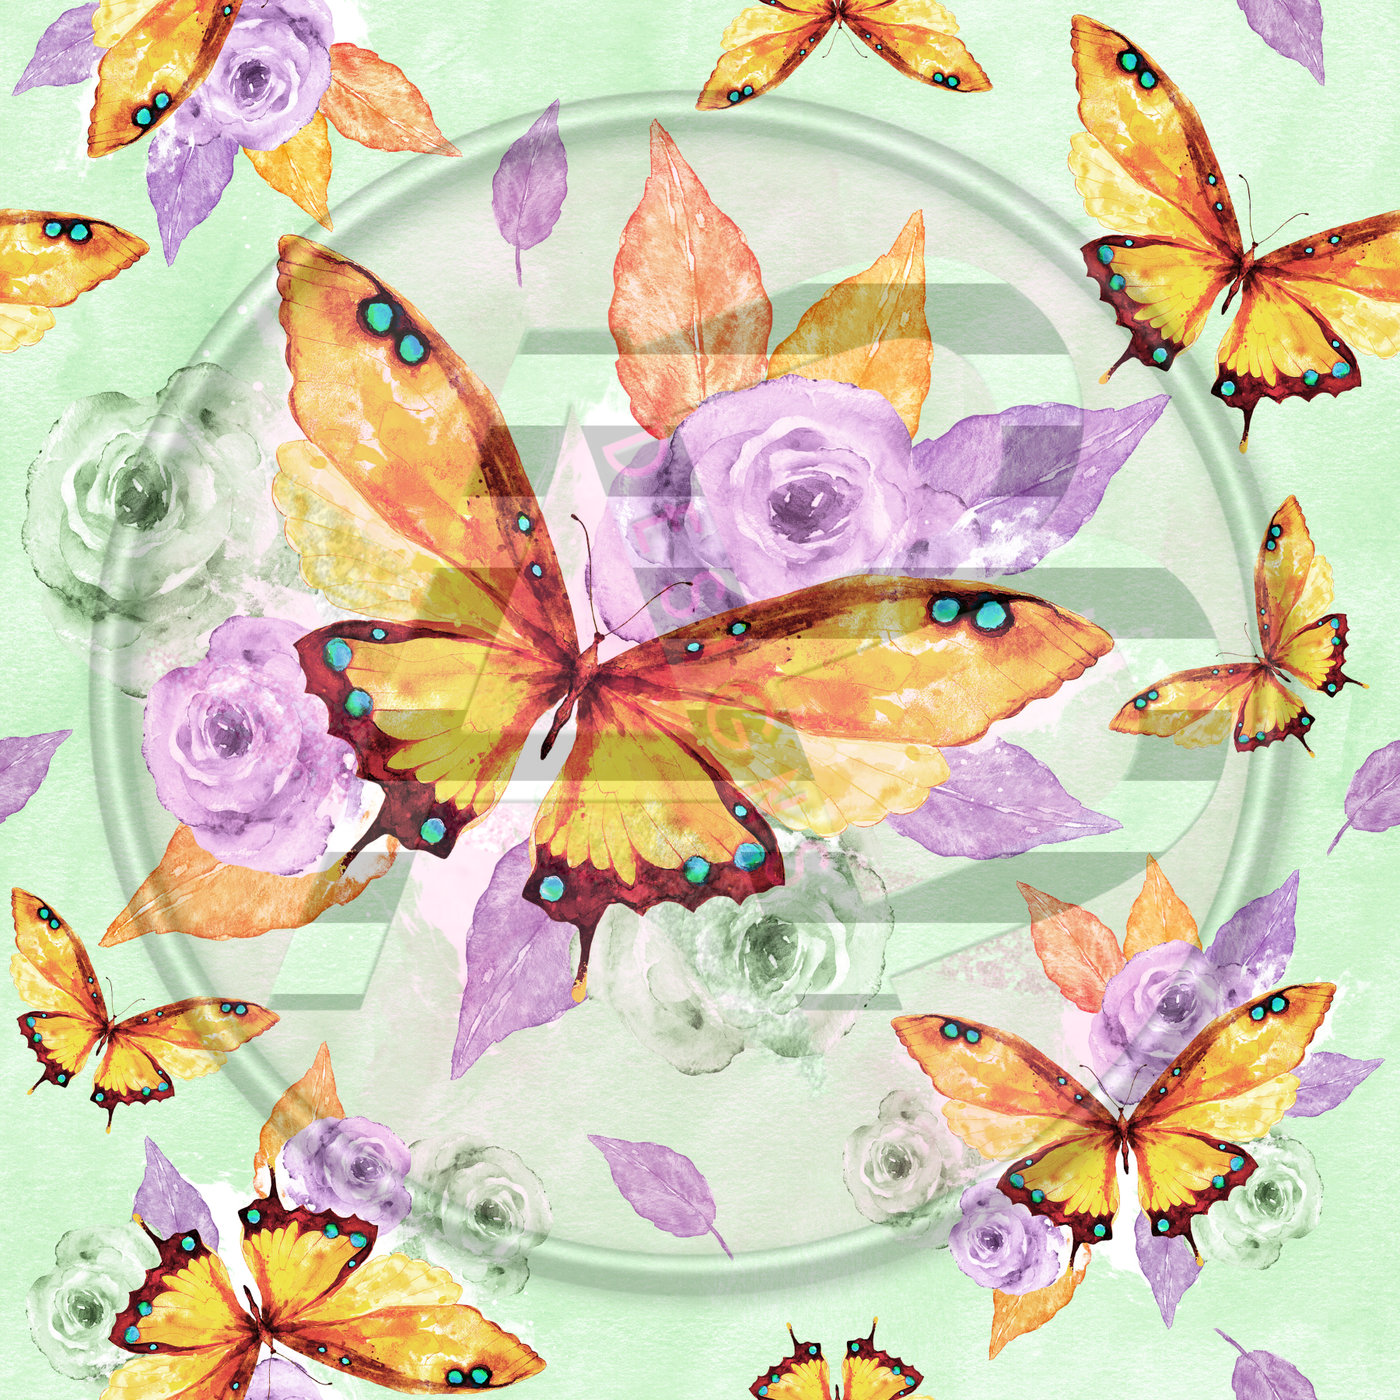 Adhesive Patterned Vinyl - Butterfly 15